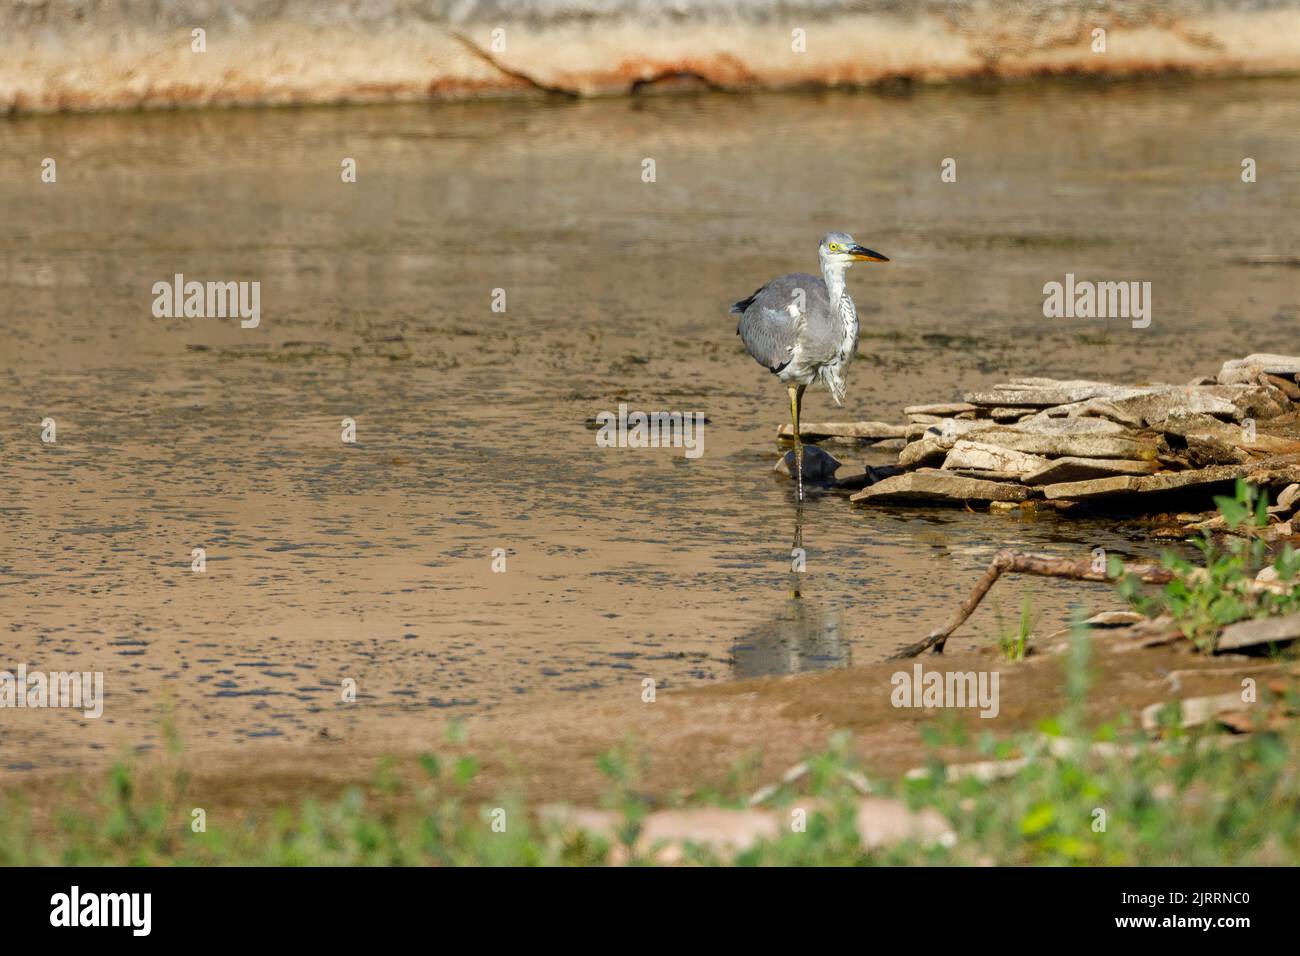 A gray heron is fishing in a river Stock Photo